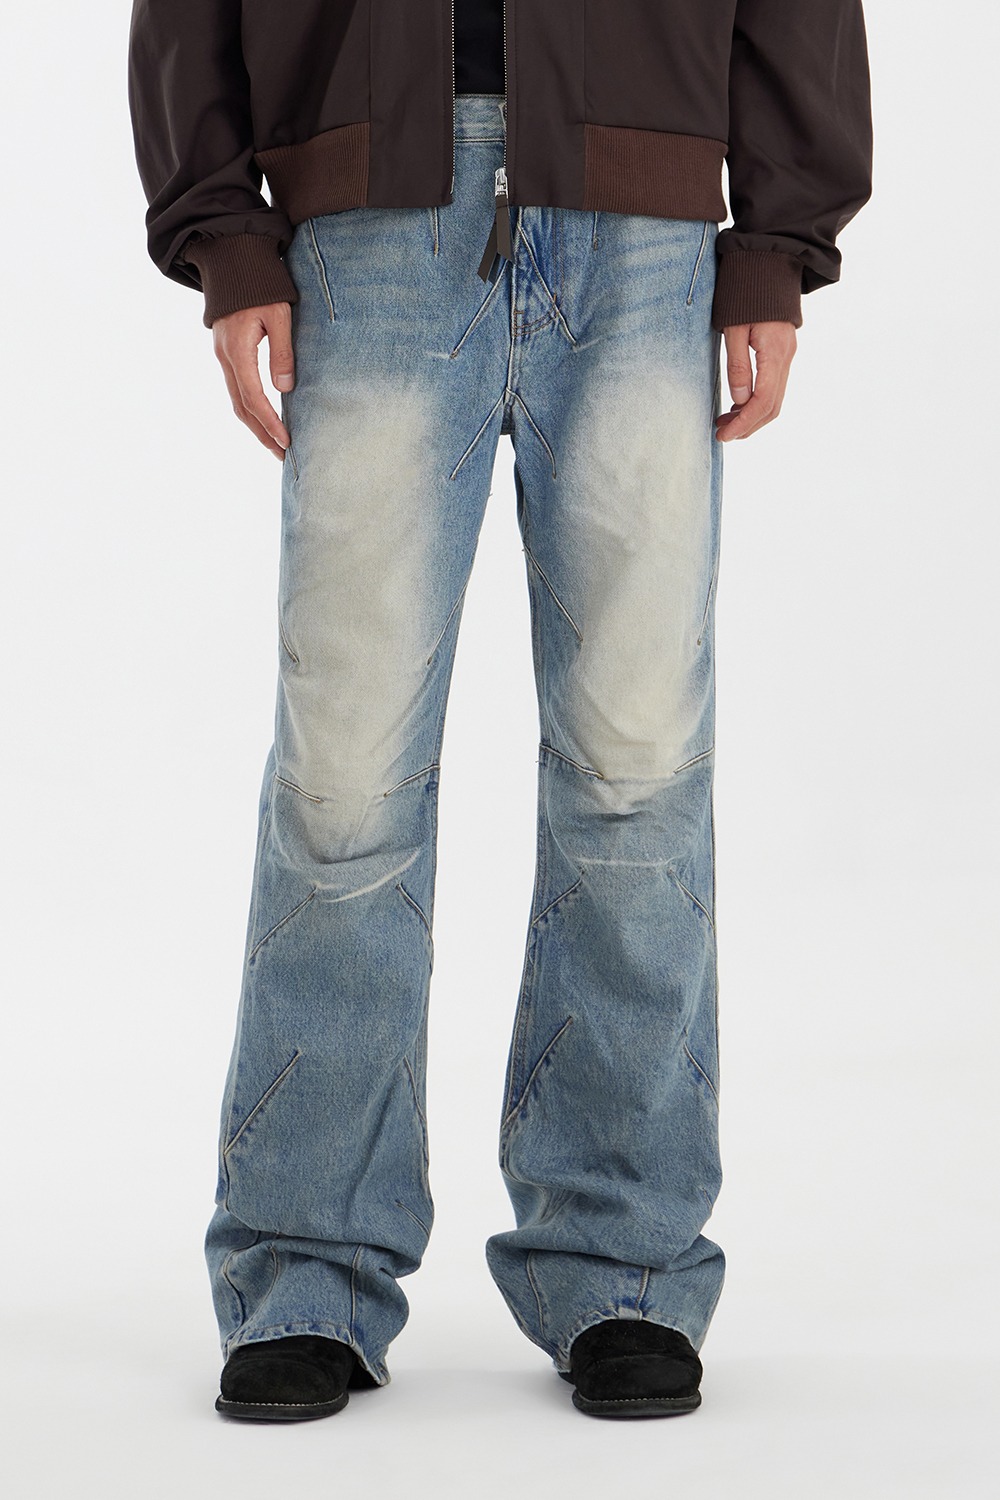 Thorns Jeans - Washed Blue